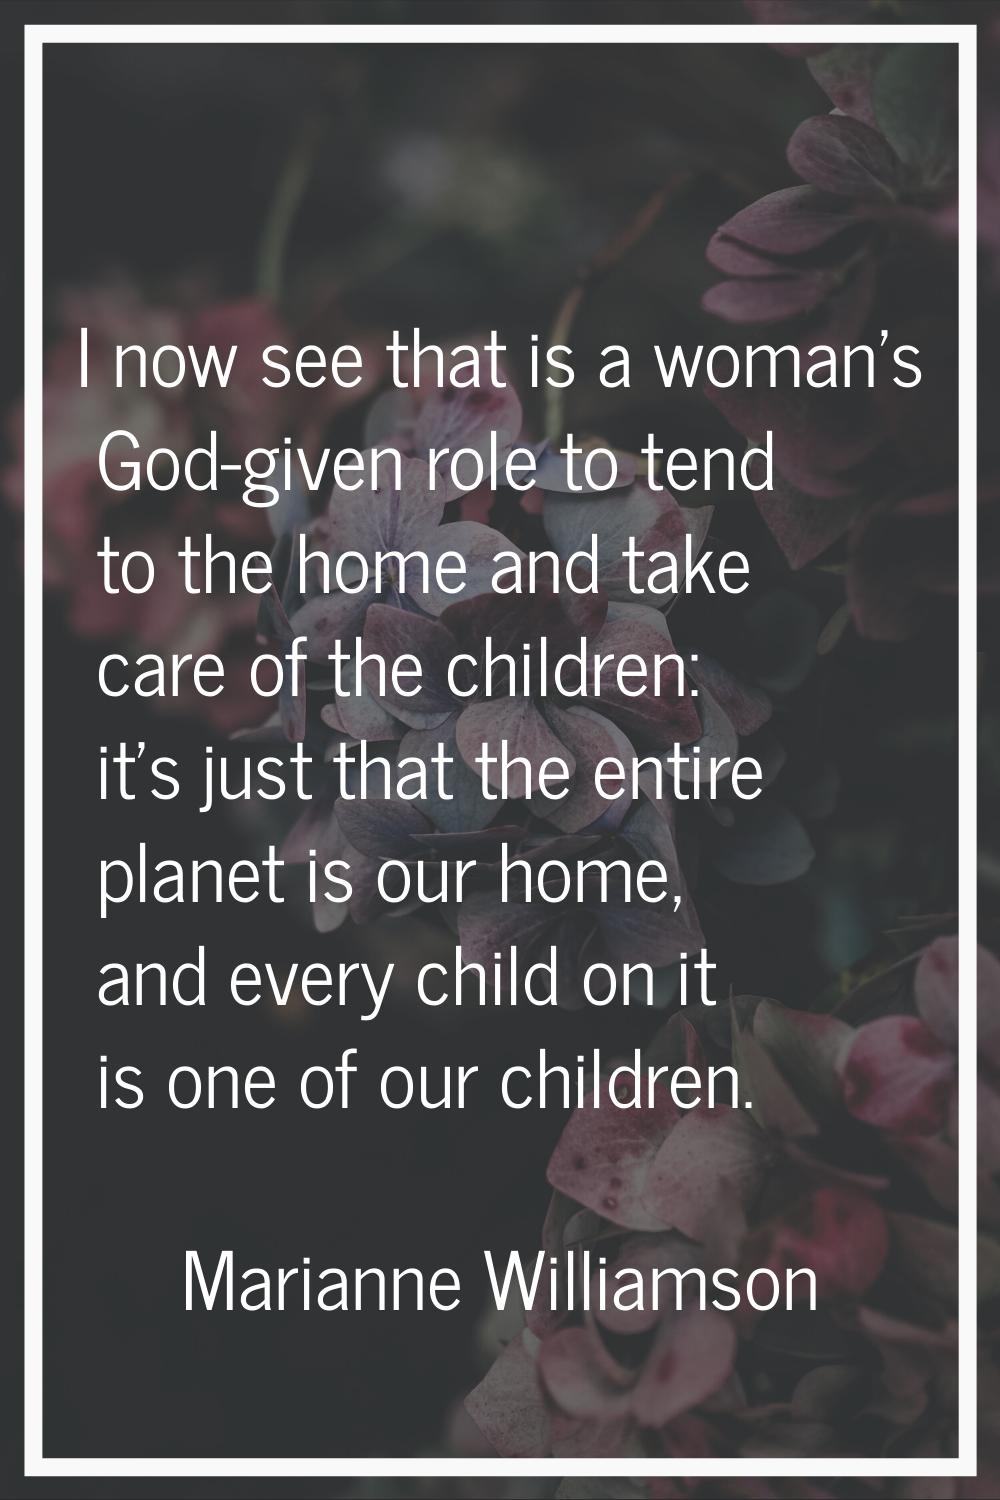 I now see that is a woman's God-given role to tend to the home and take care of the children: it's 